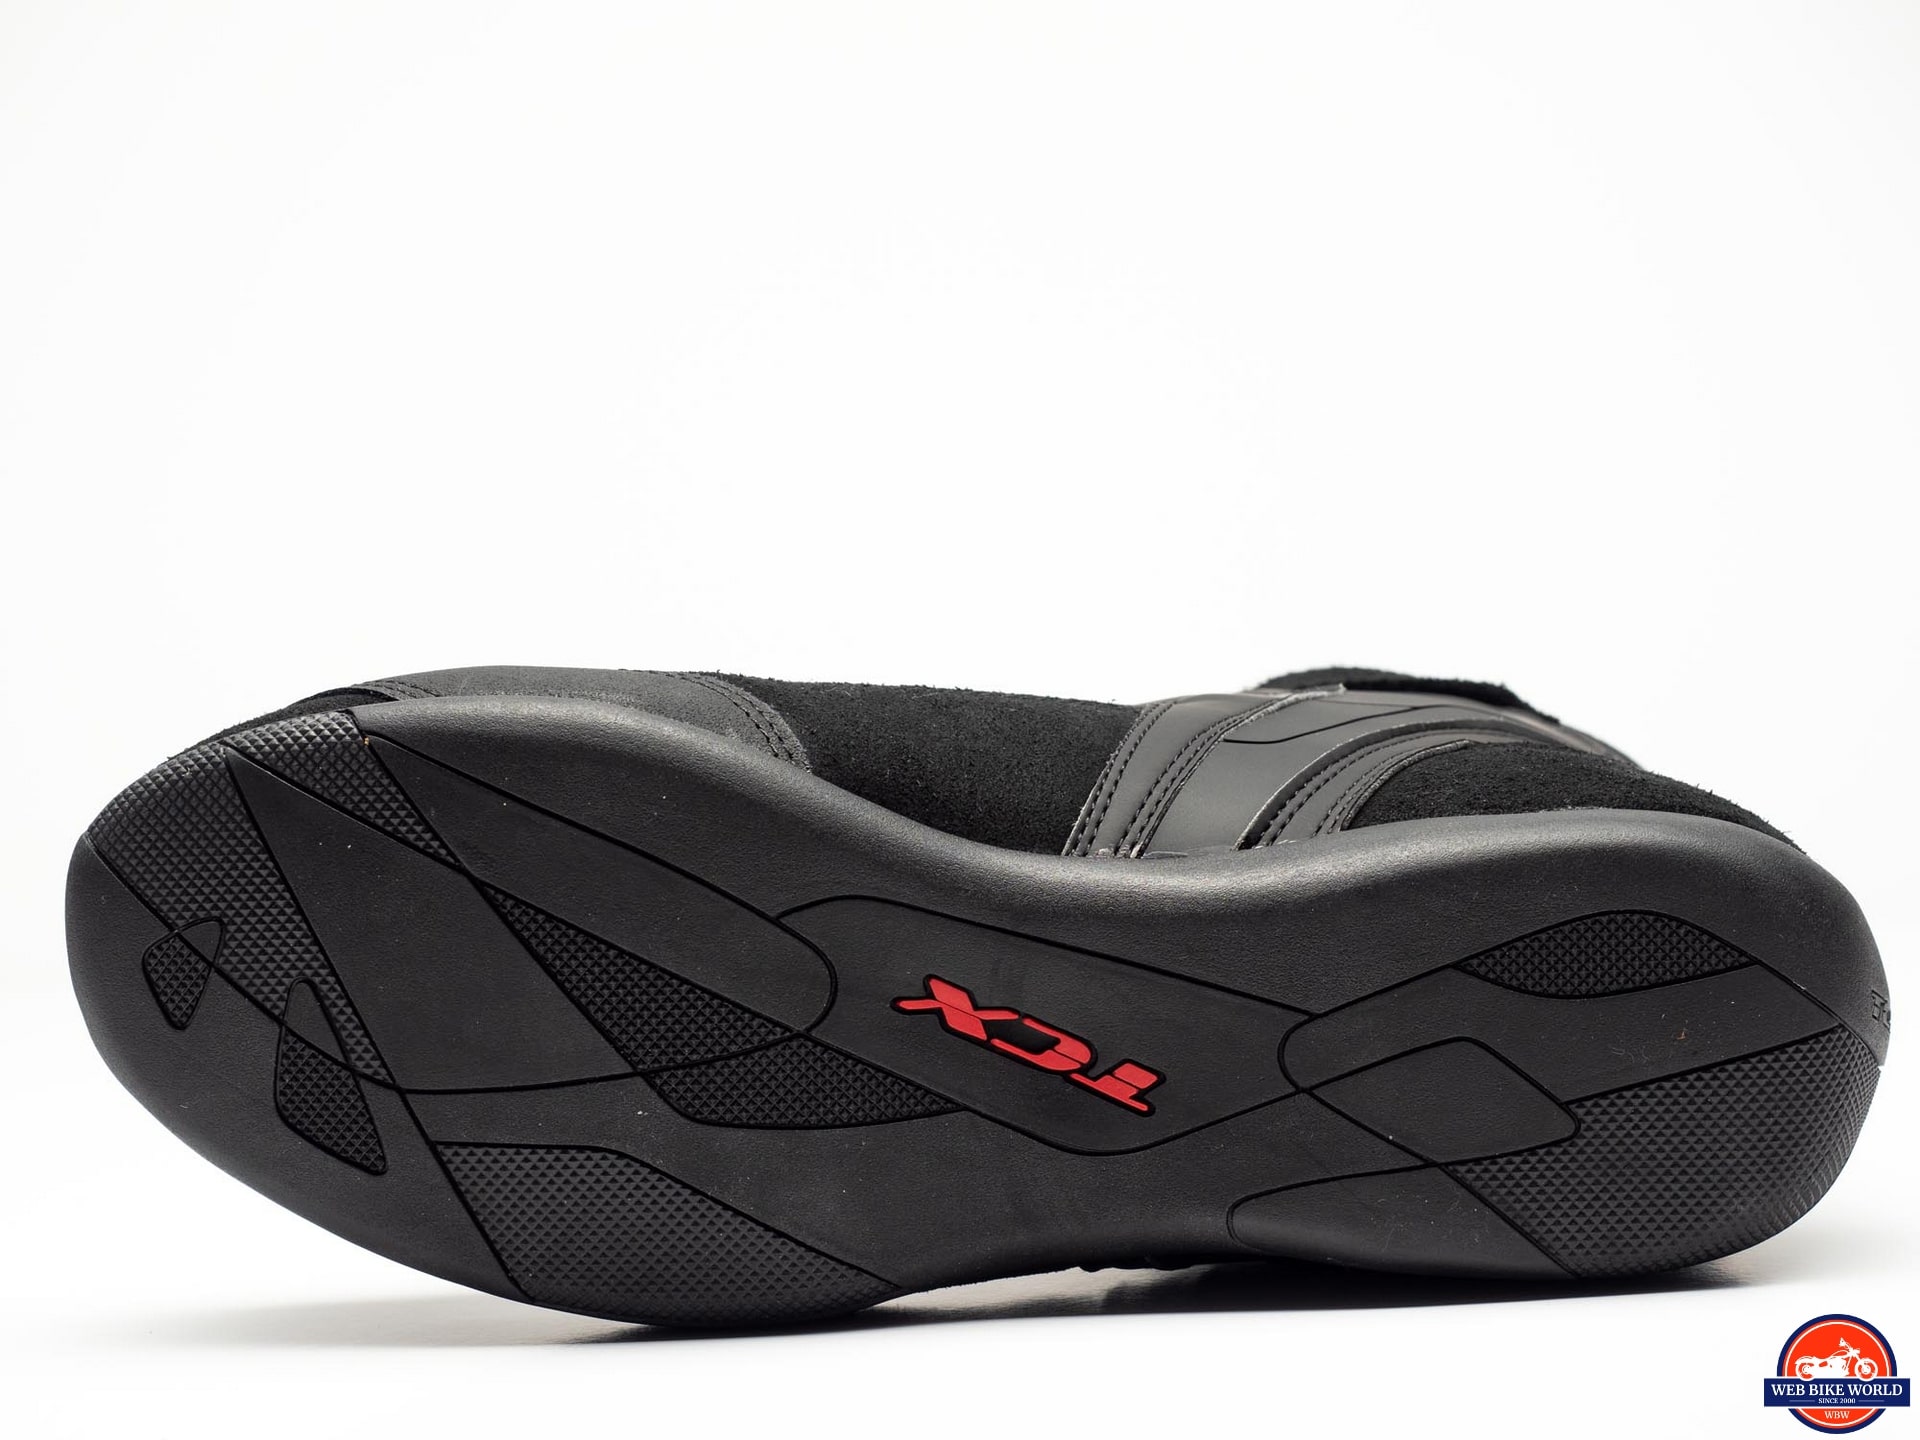 TCX Vibe Air Boots Review: A Pleasant 